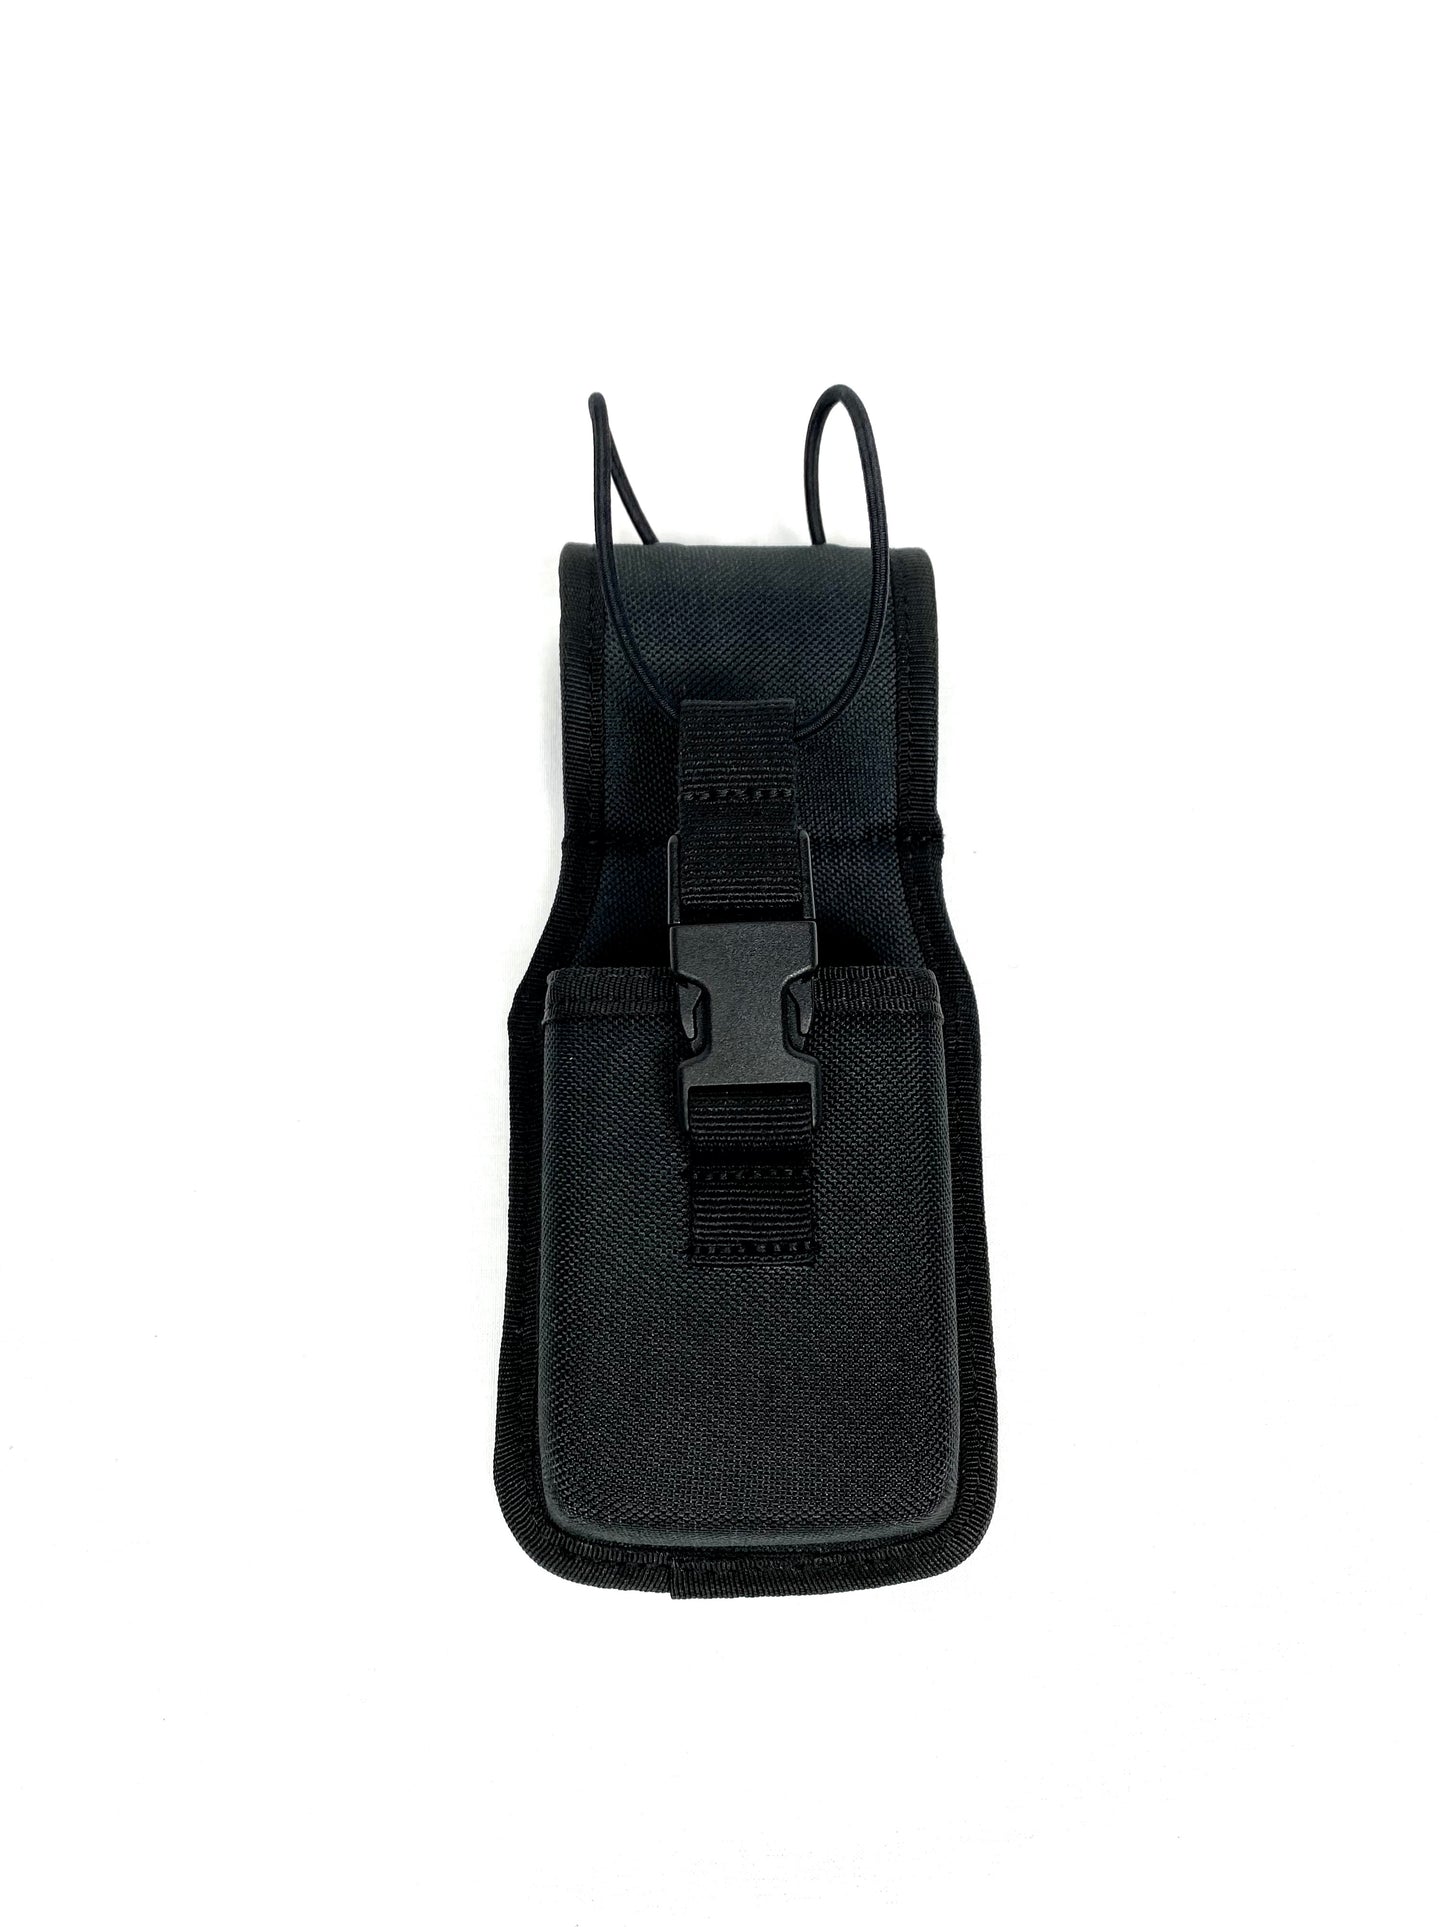 X-Fire Universal Washable Nylon Radio Case Two-Way Portable Radio Holder/Holster Pouch Case for Walkie Talkies. Fits Duty Belts to 2.25"